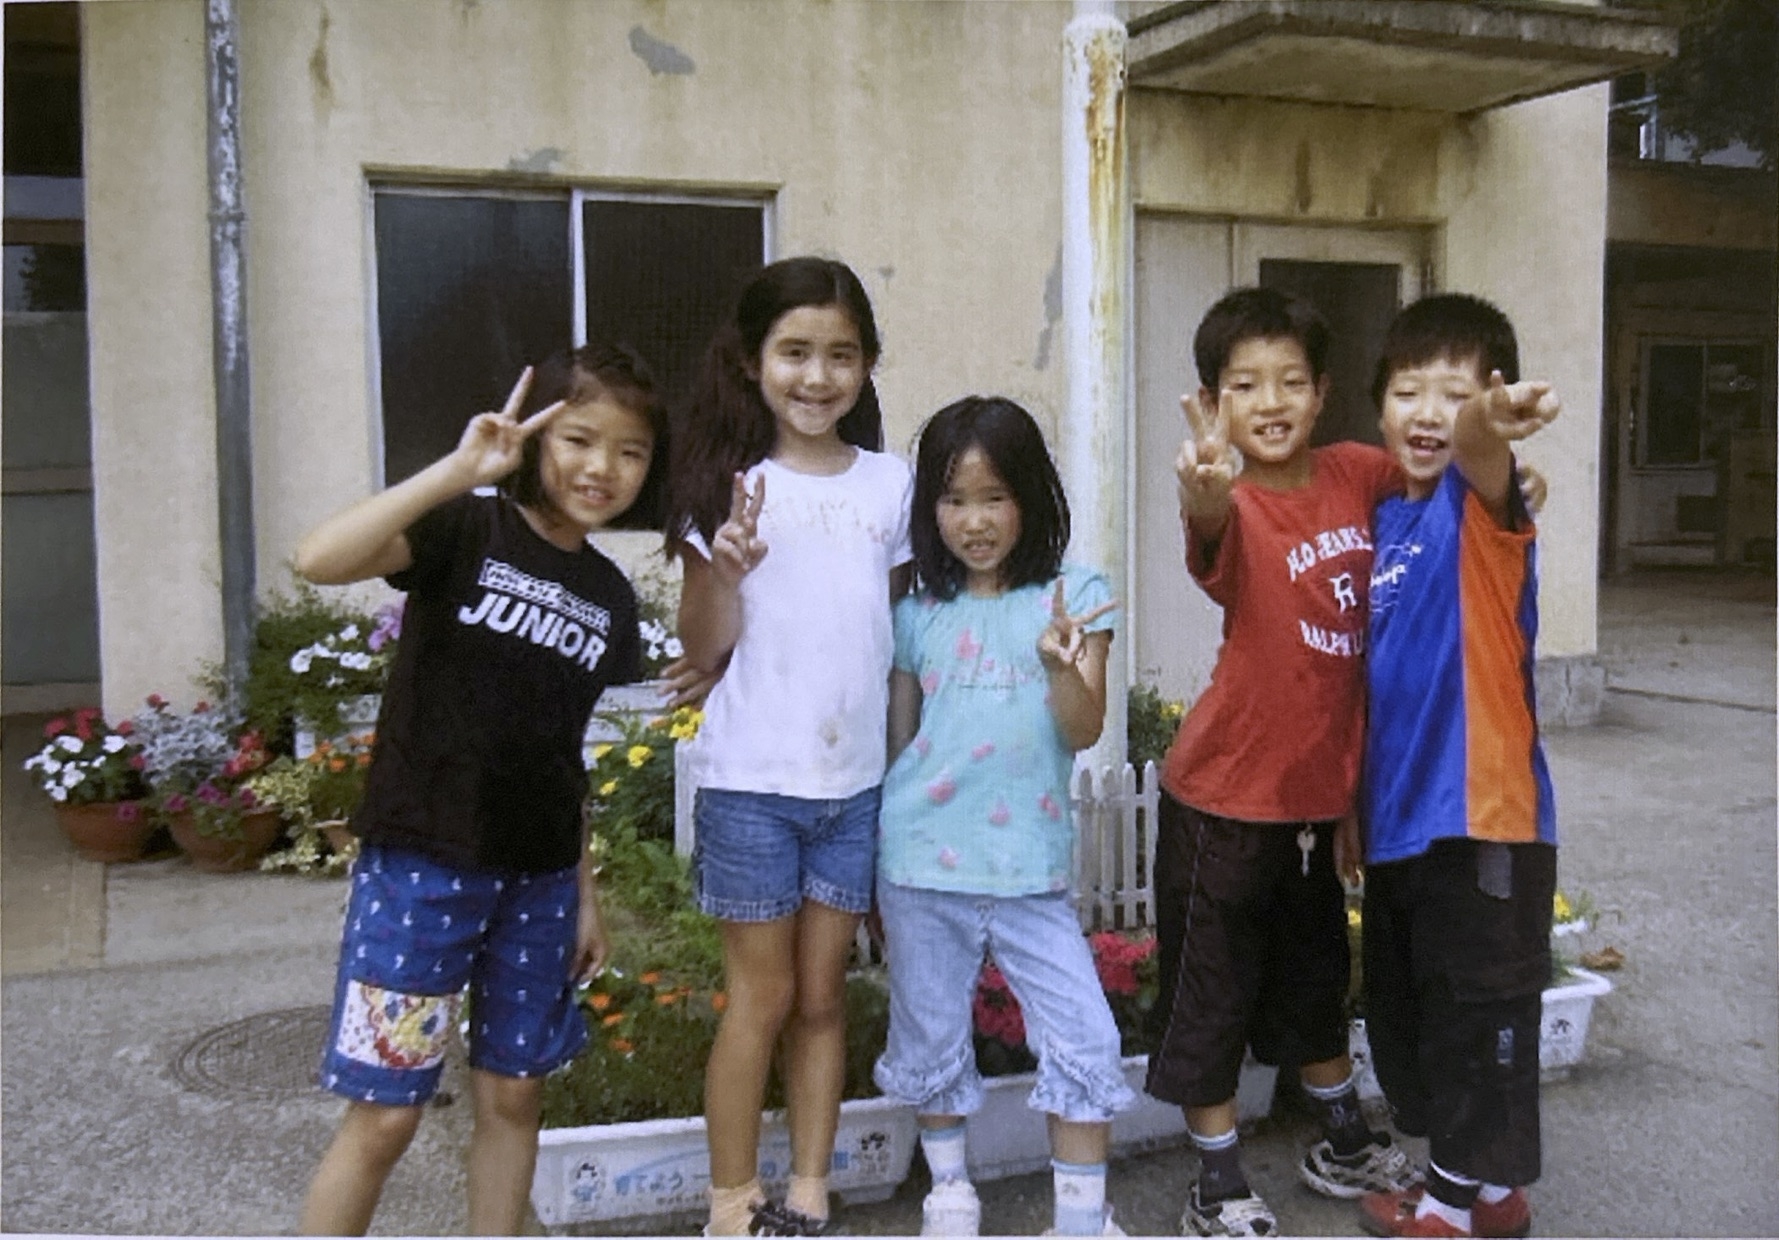 Five children standing outside a building, smiling and making peace signs